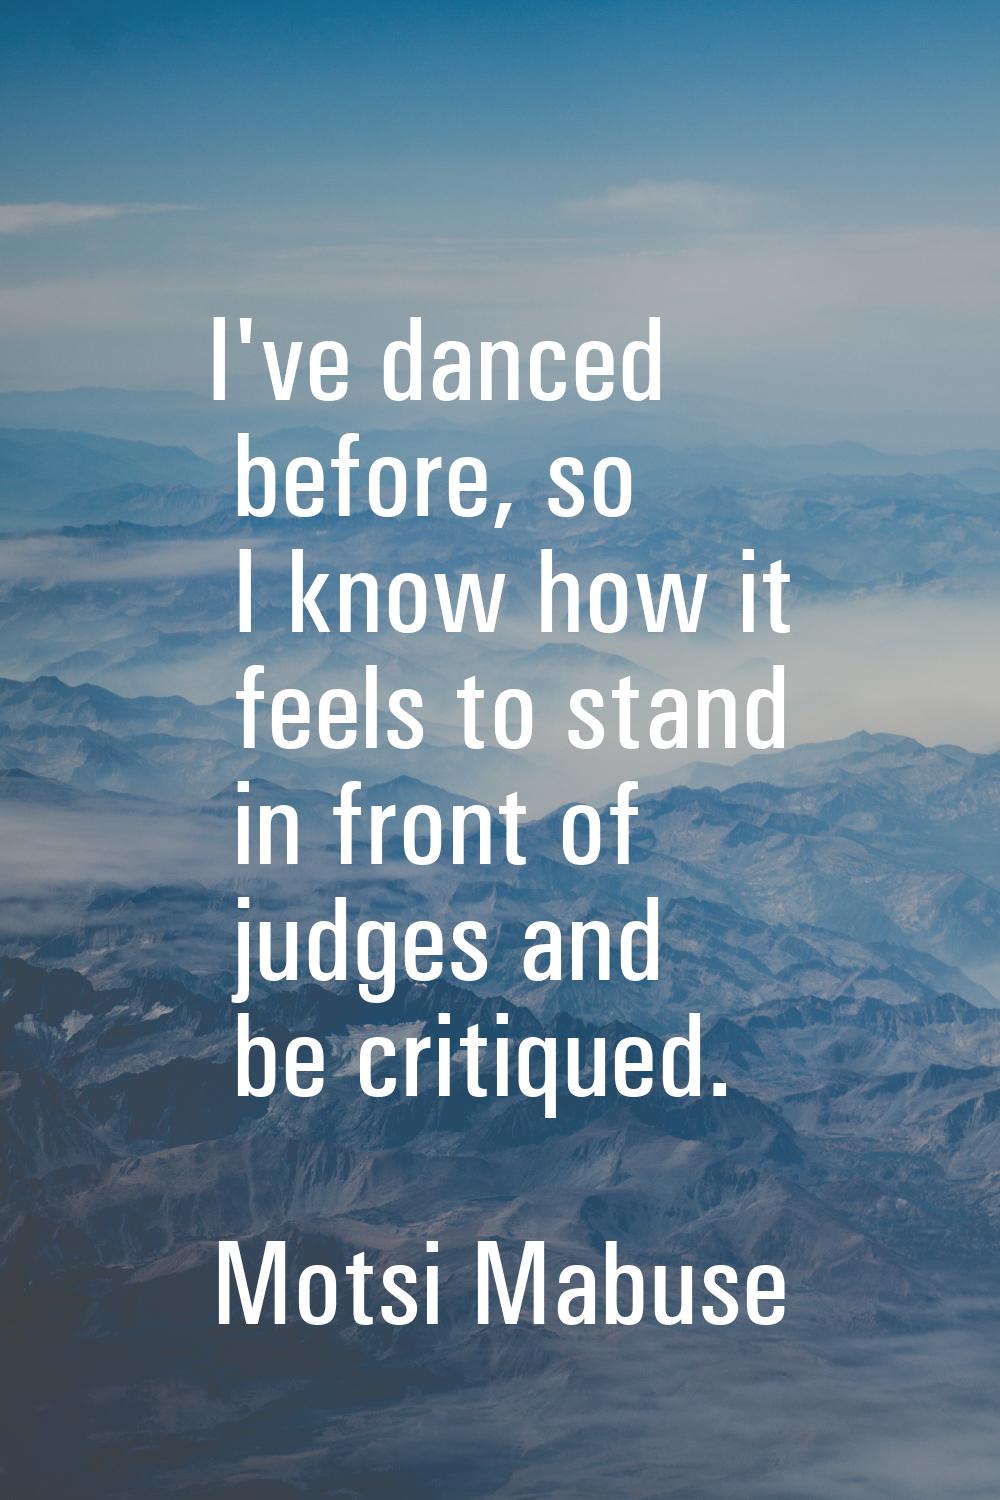 I've danced before, so I know how it feels to stand in front of judges and be critiqued.